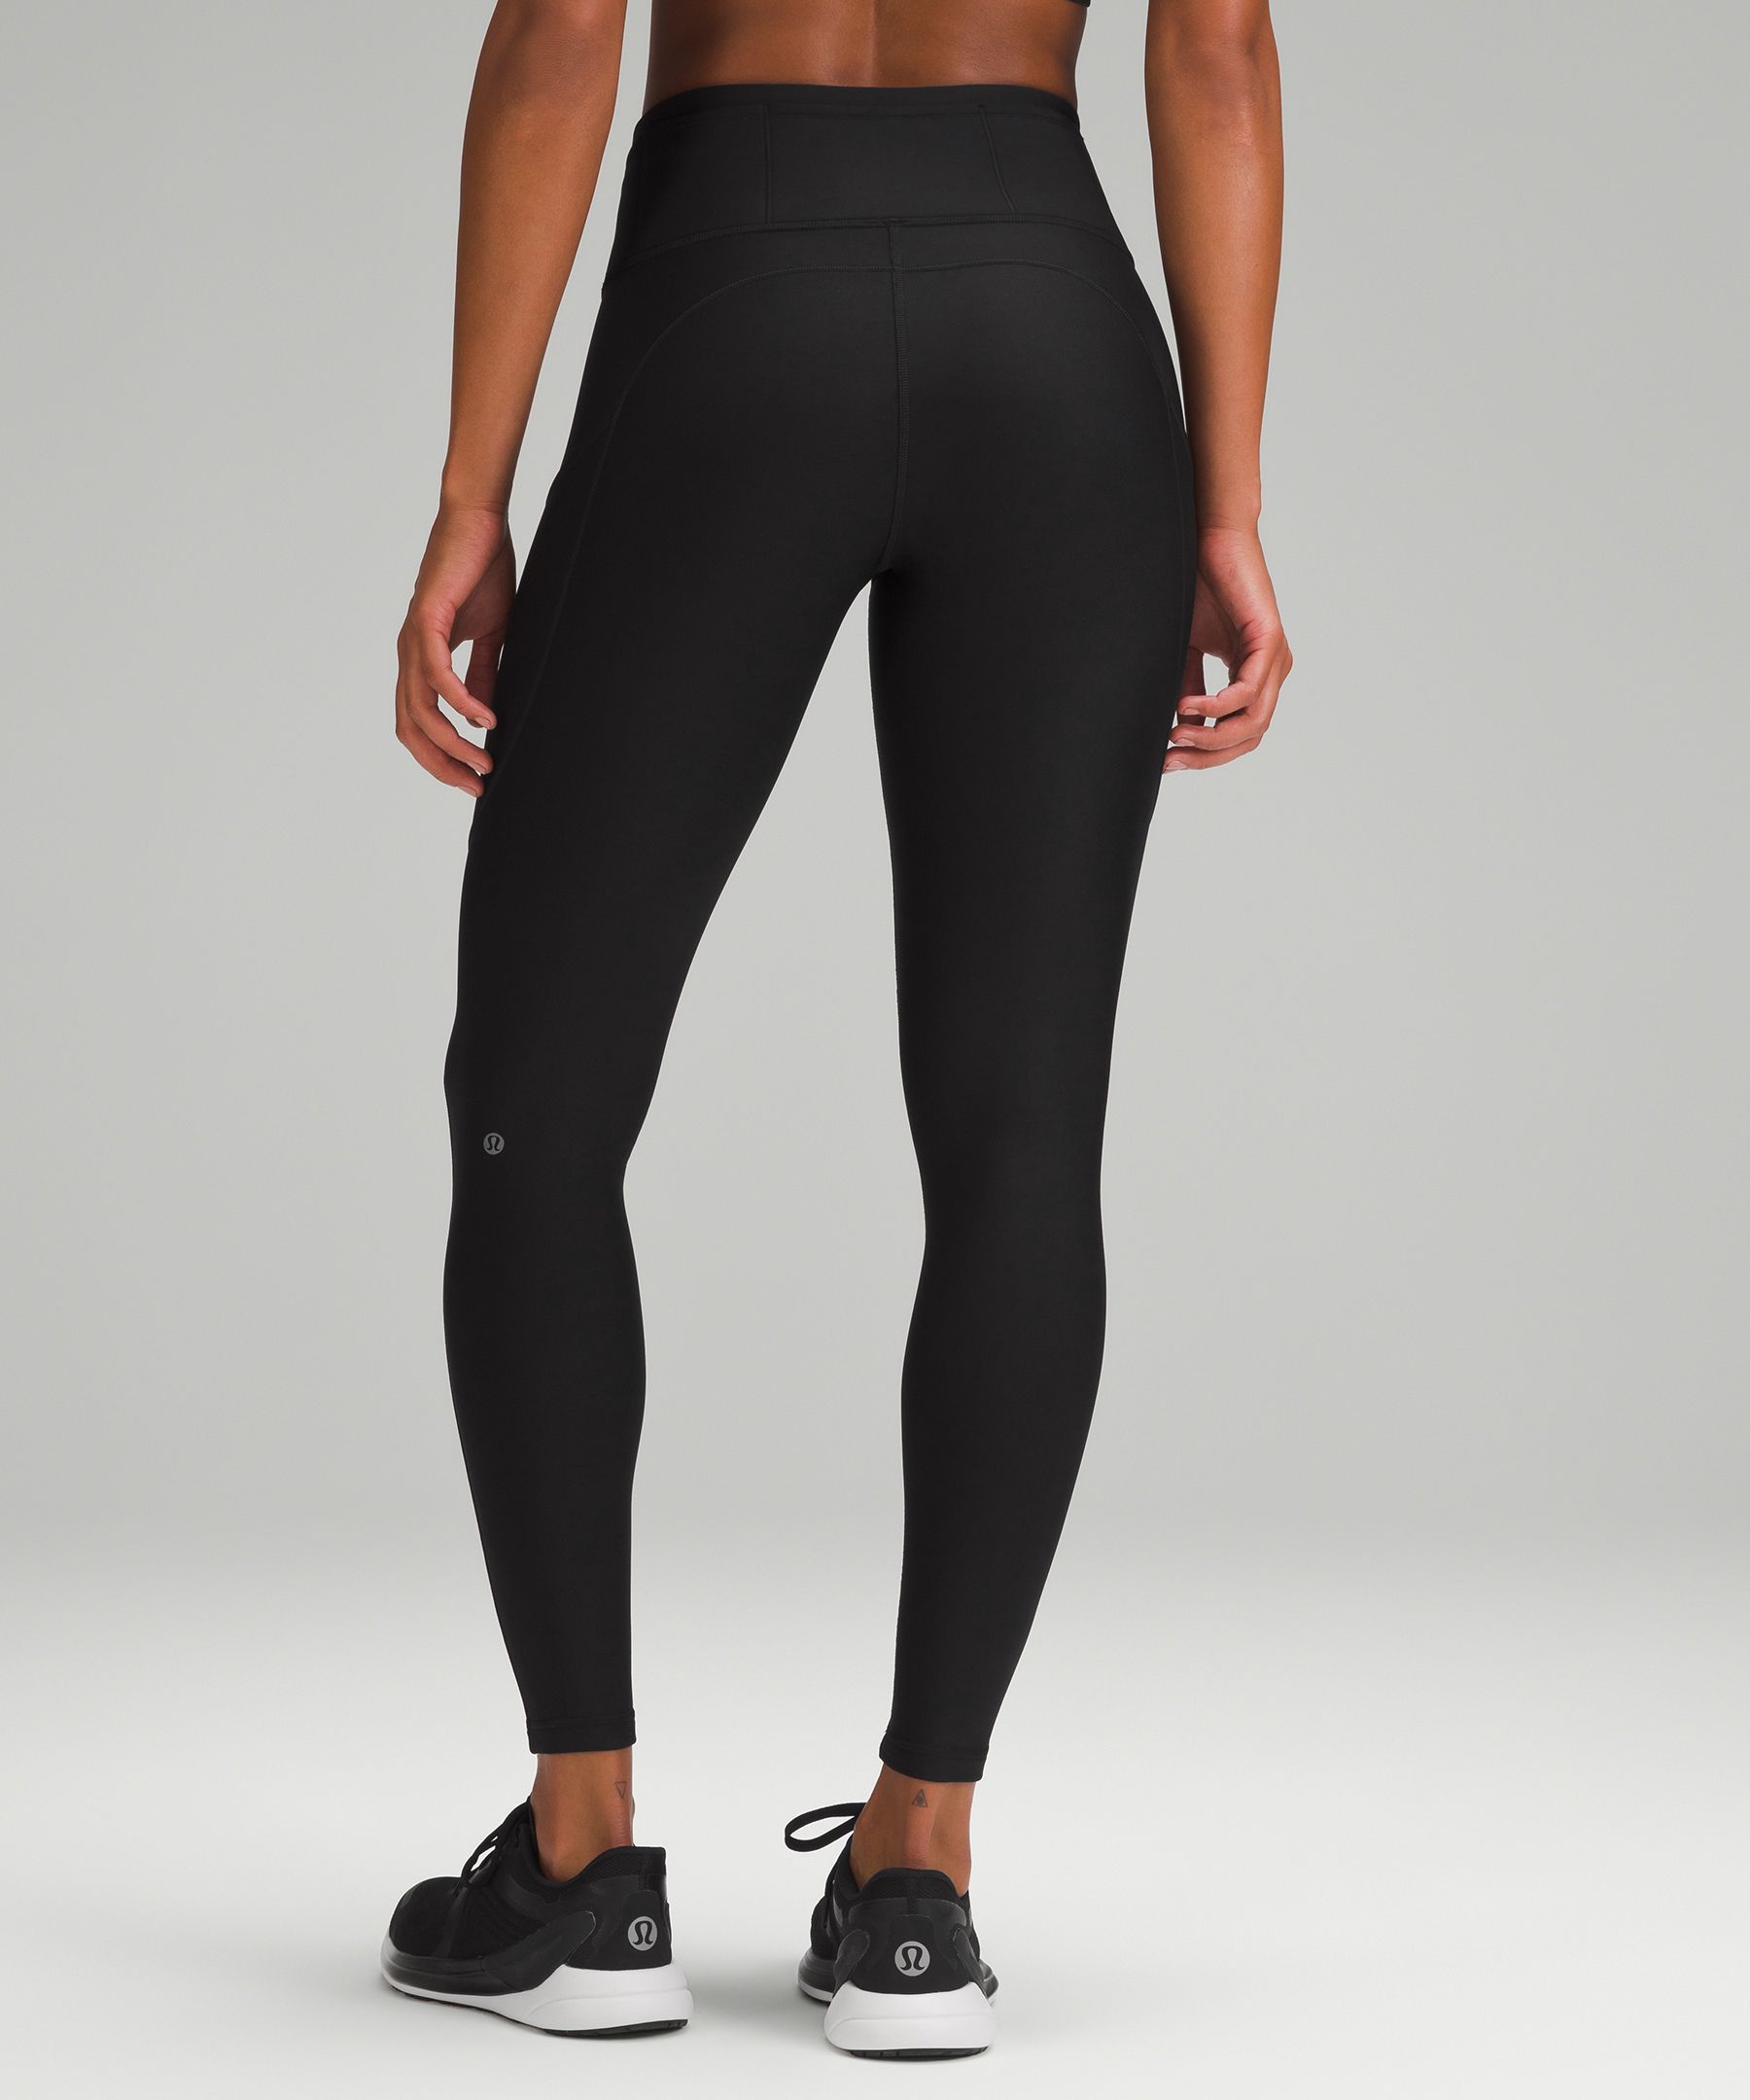 Lululemon Fast and Free Tights Review - Agent Athletica